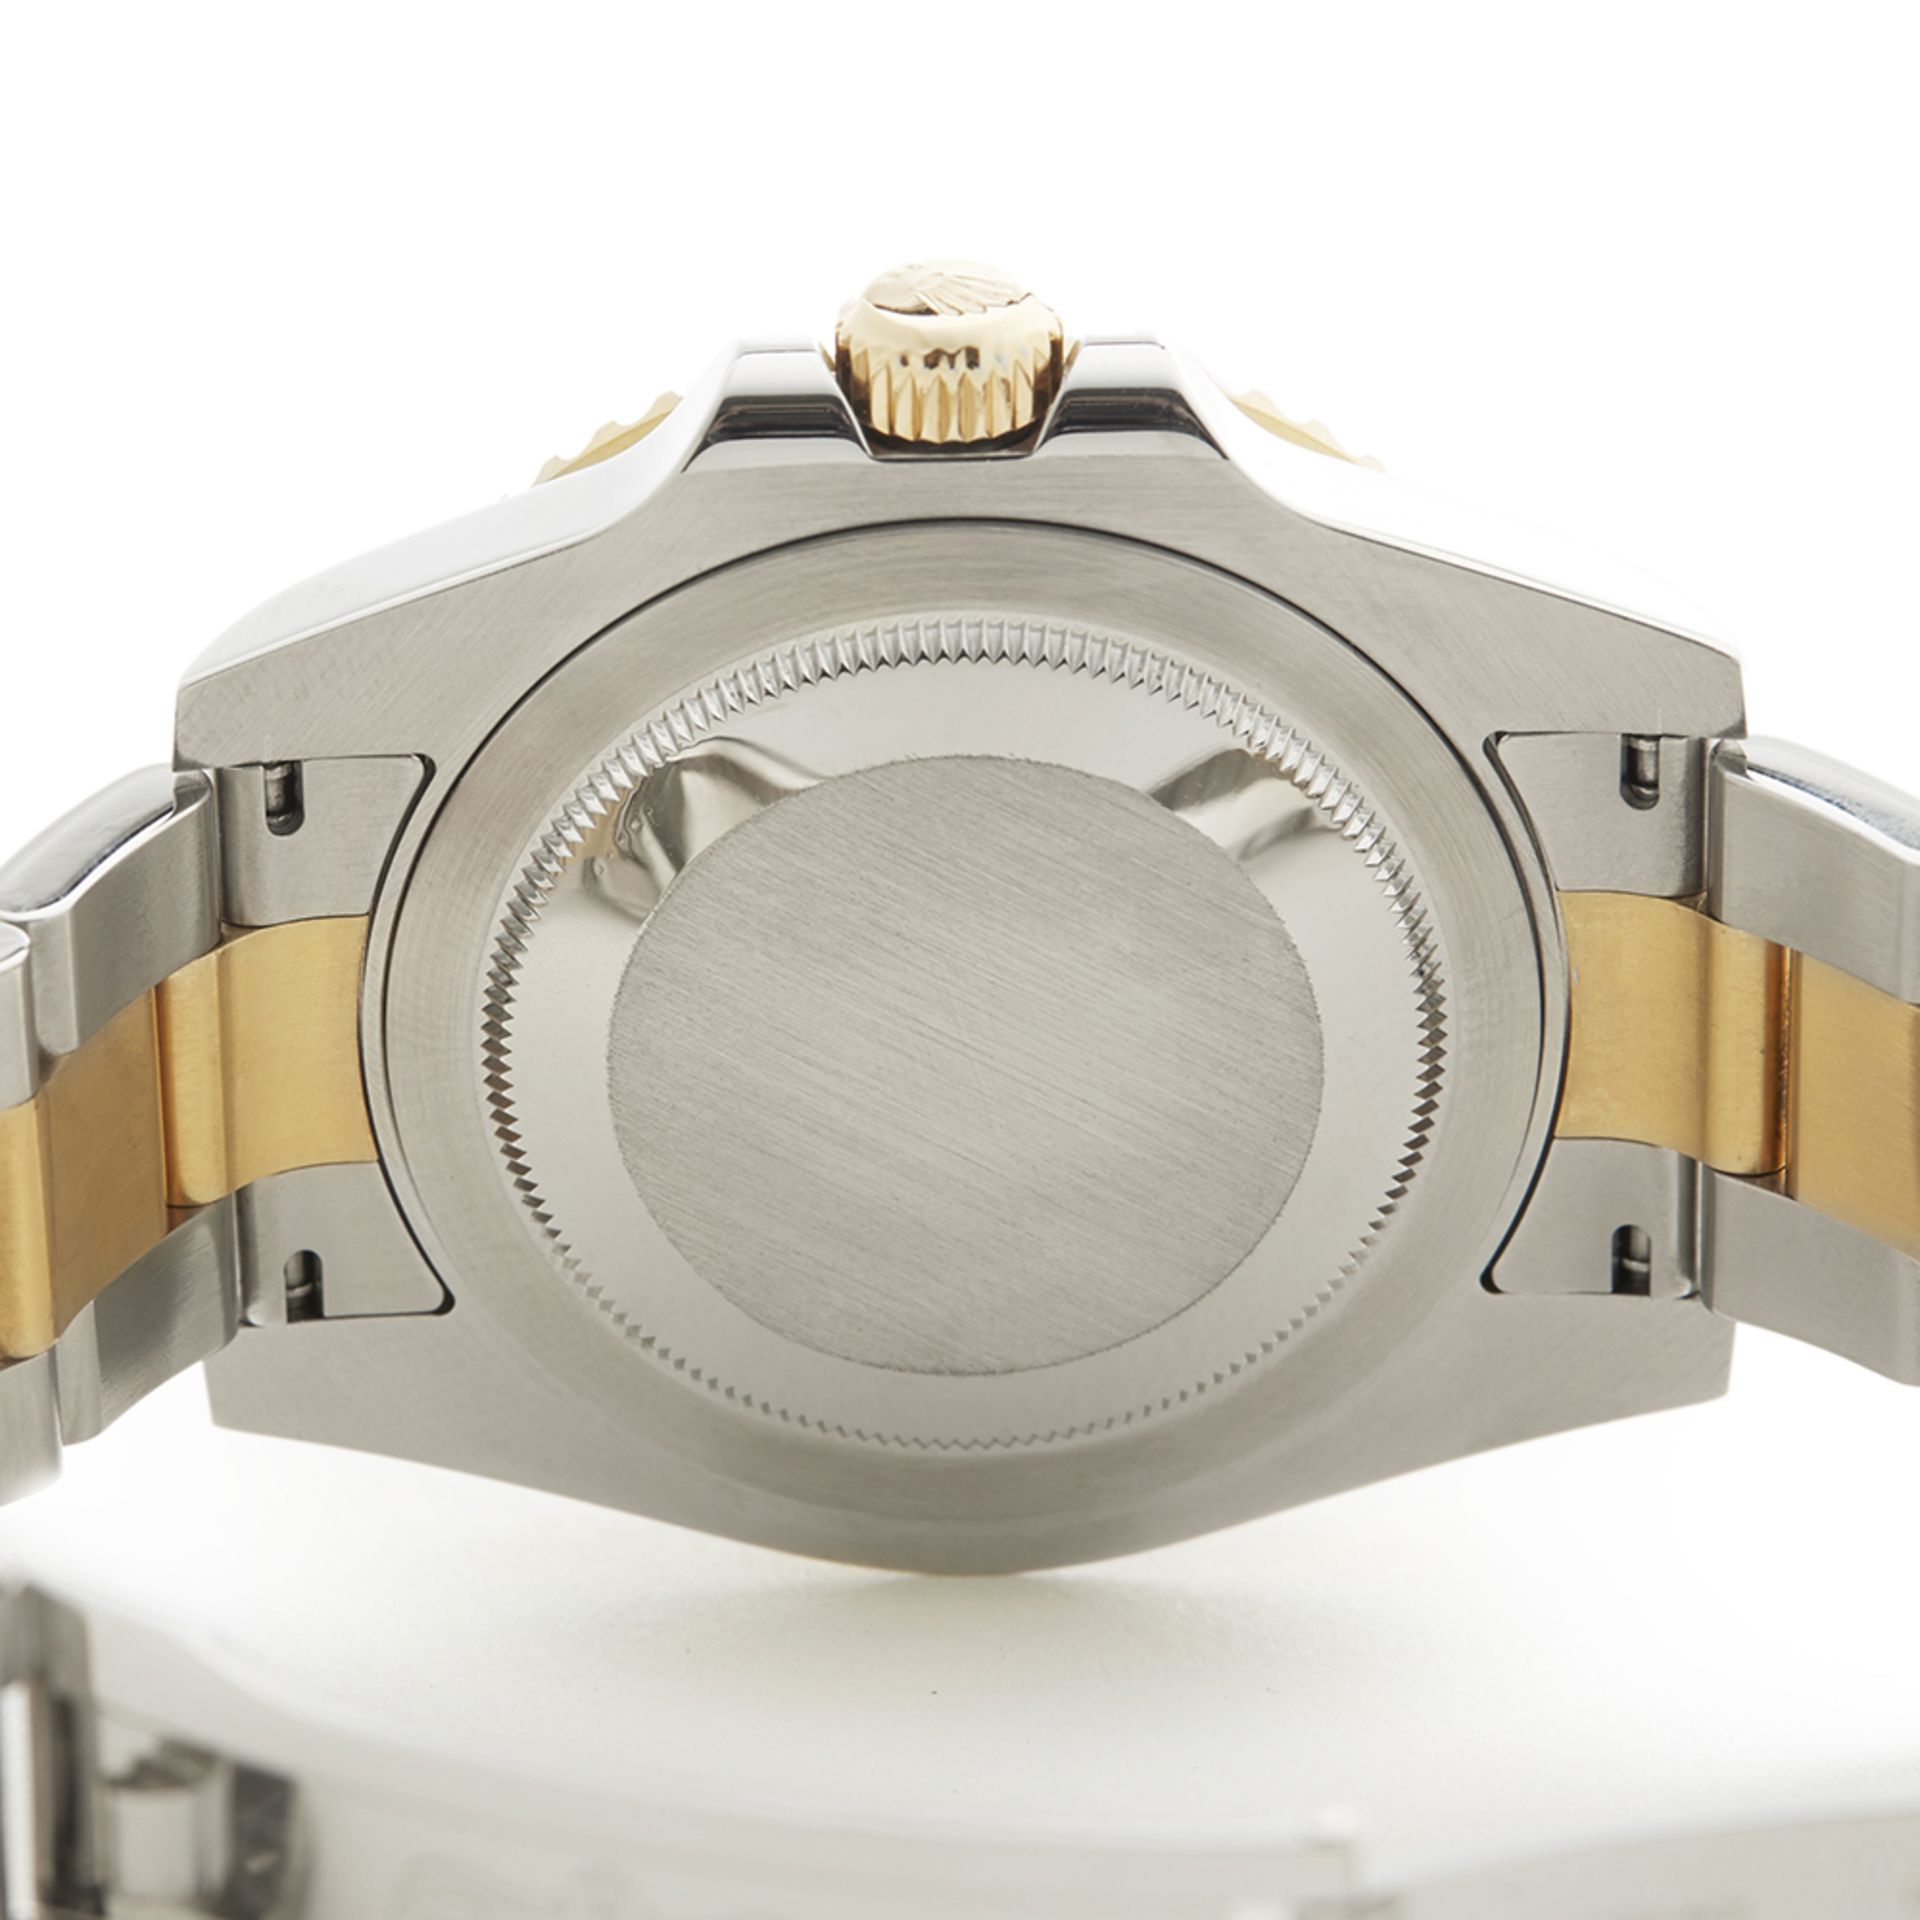 GMT-Master II 40mm Stainless Steel & 18K Yellow Gold - 116713 - Image 8 of 9